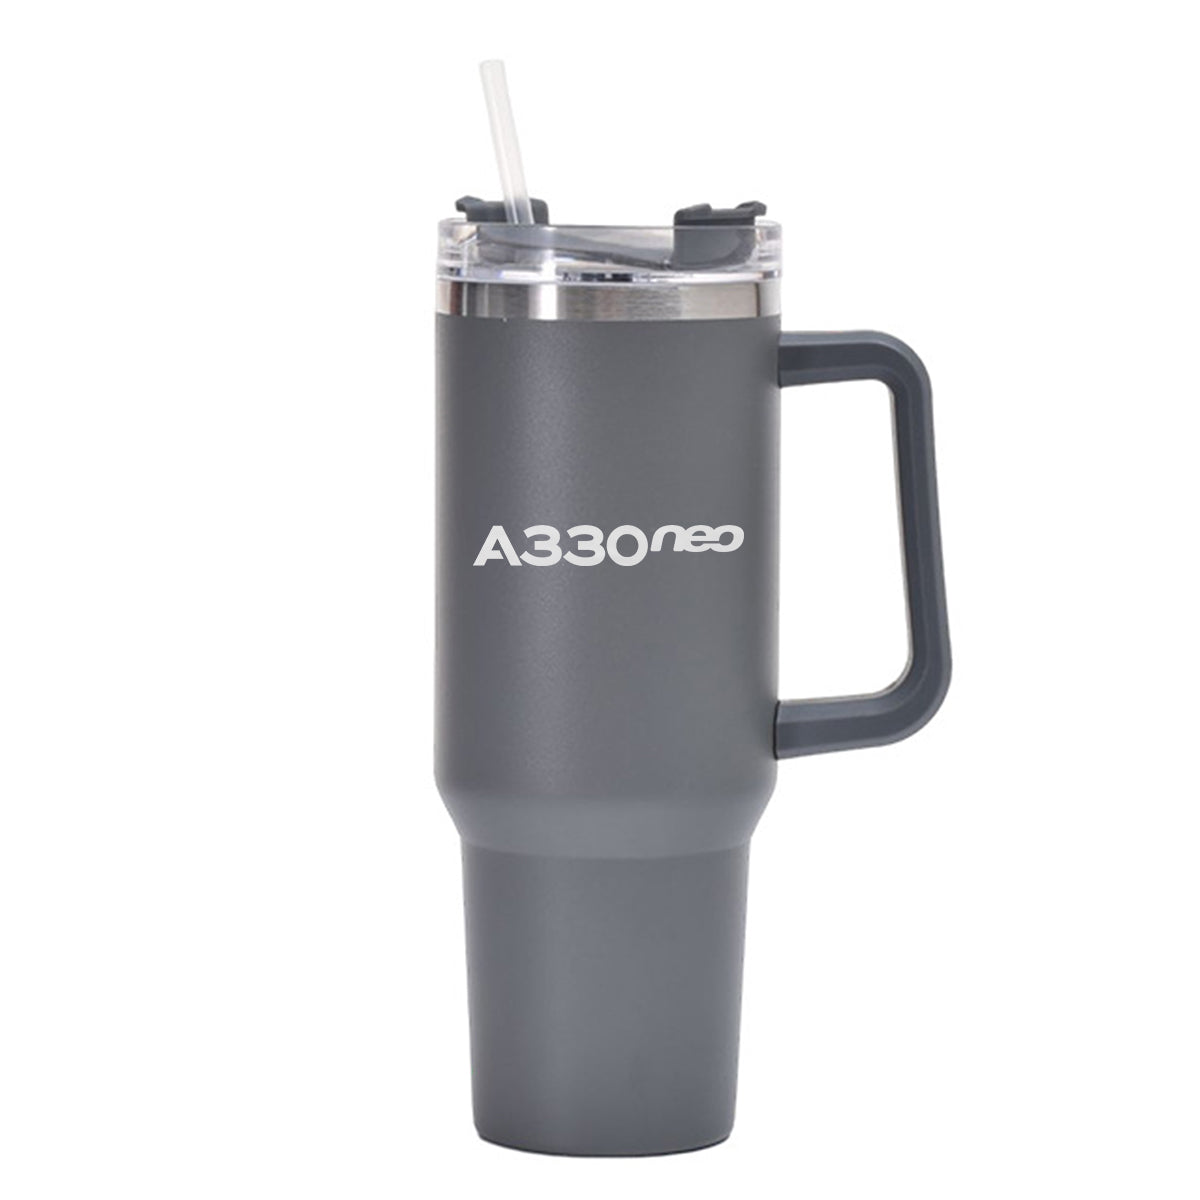 A330neo & Text Designed 40oz Stainless Steel Car Mug With Holder